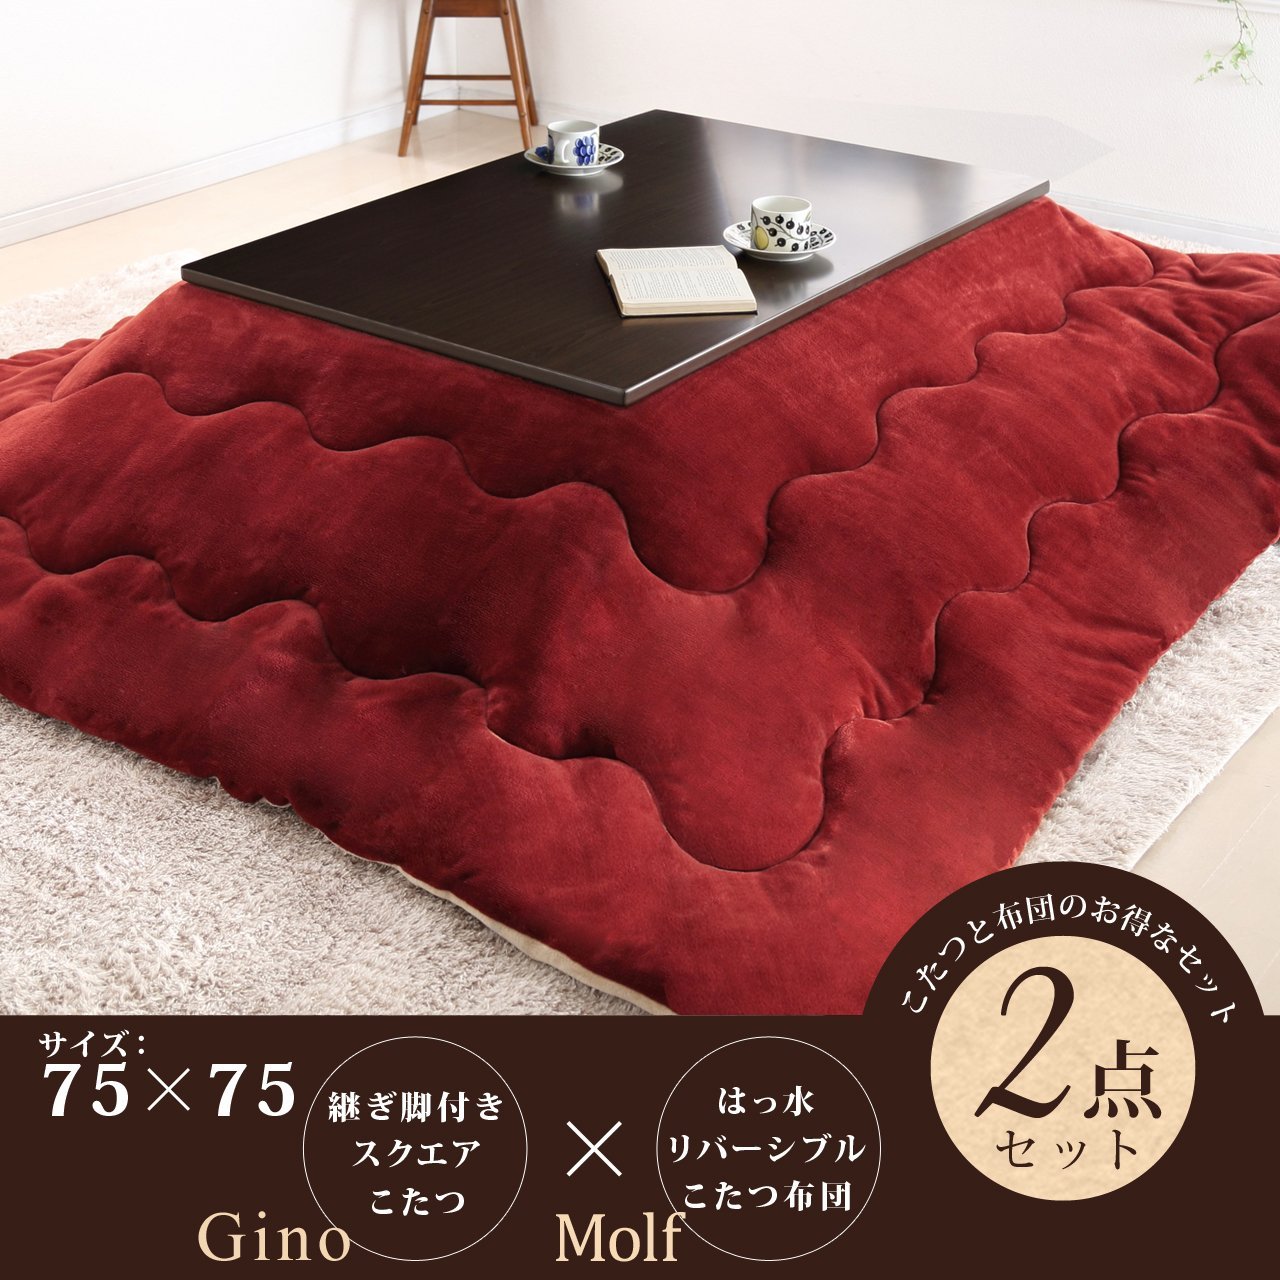 Kotatsu Heated Tables: The Table You Might Not Want to Leave in 